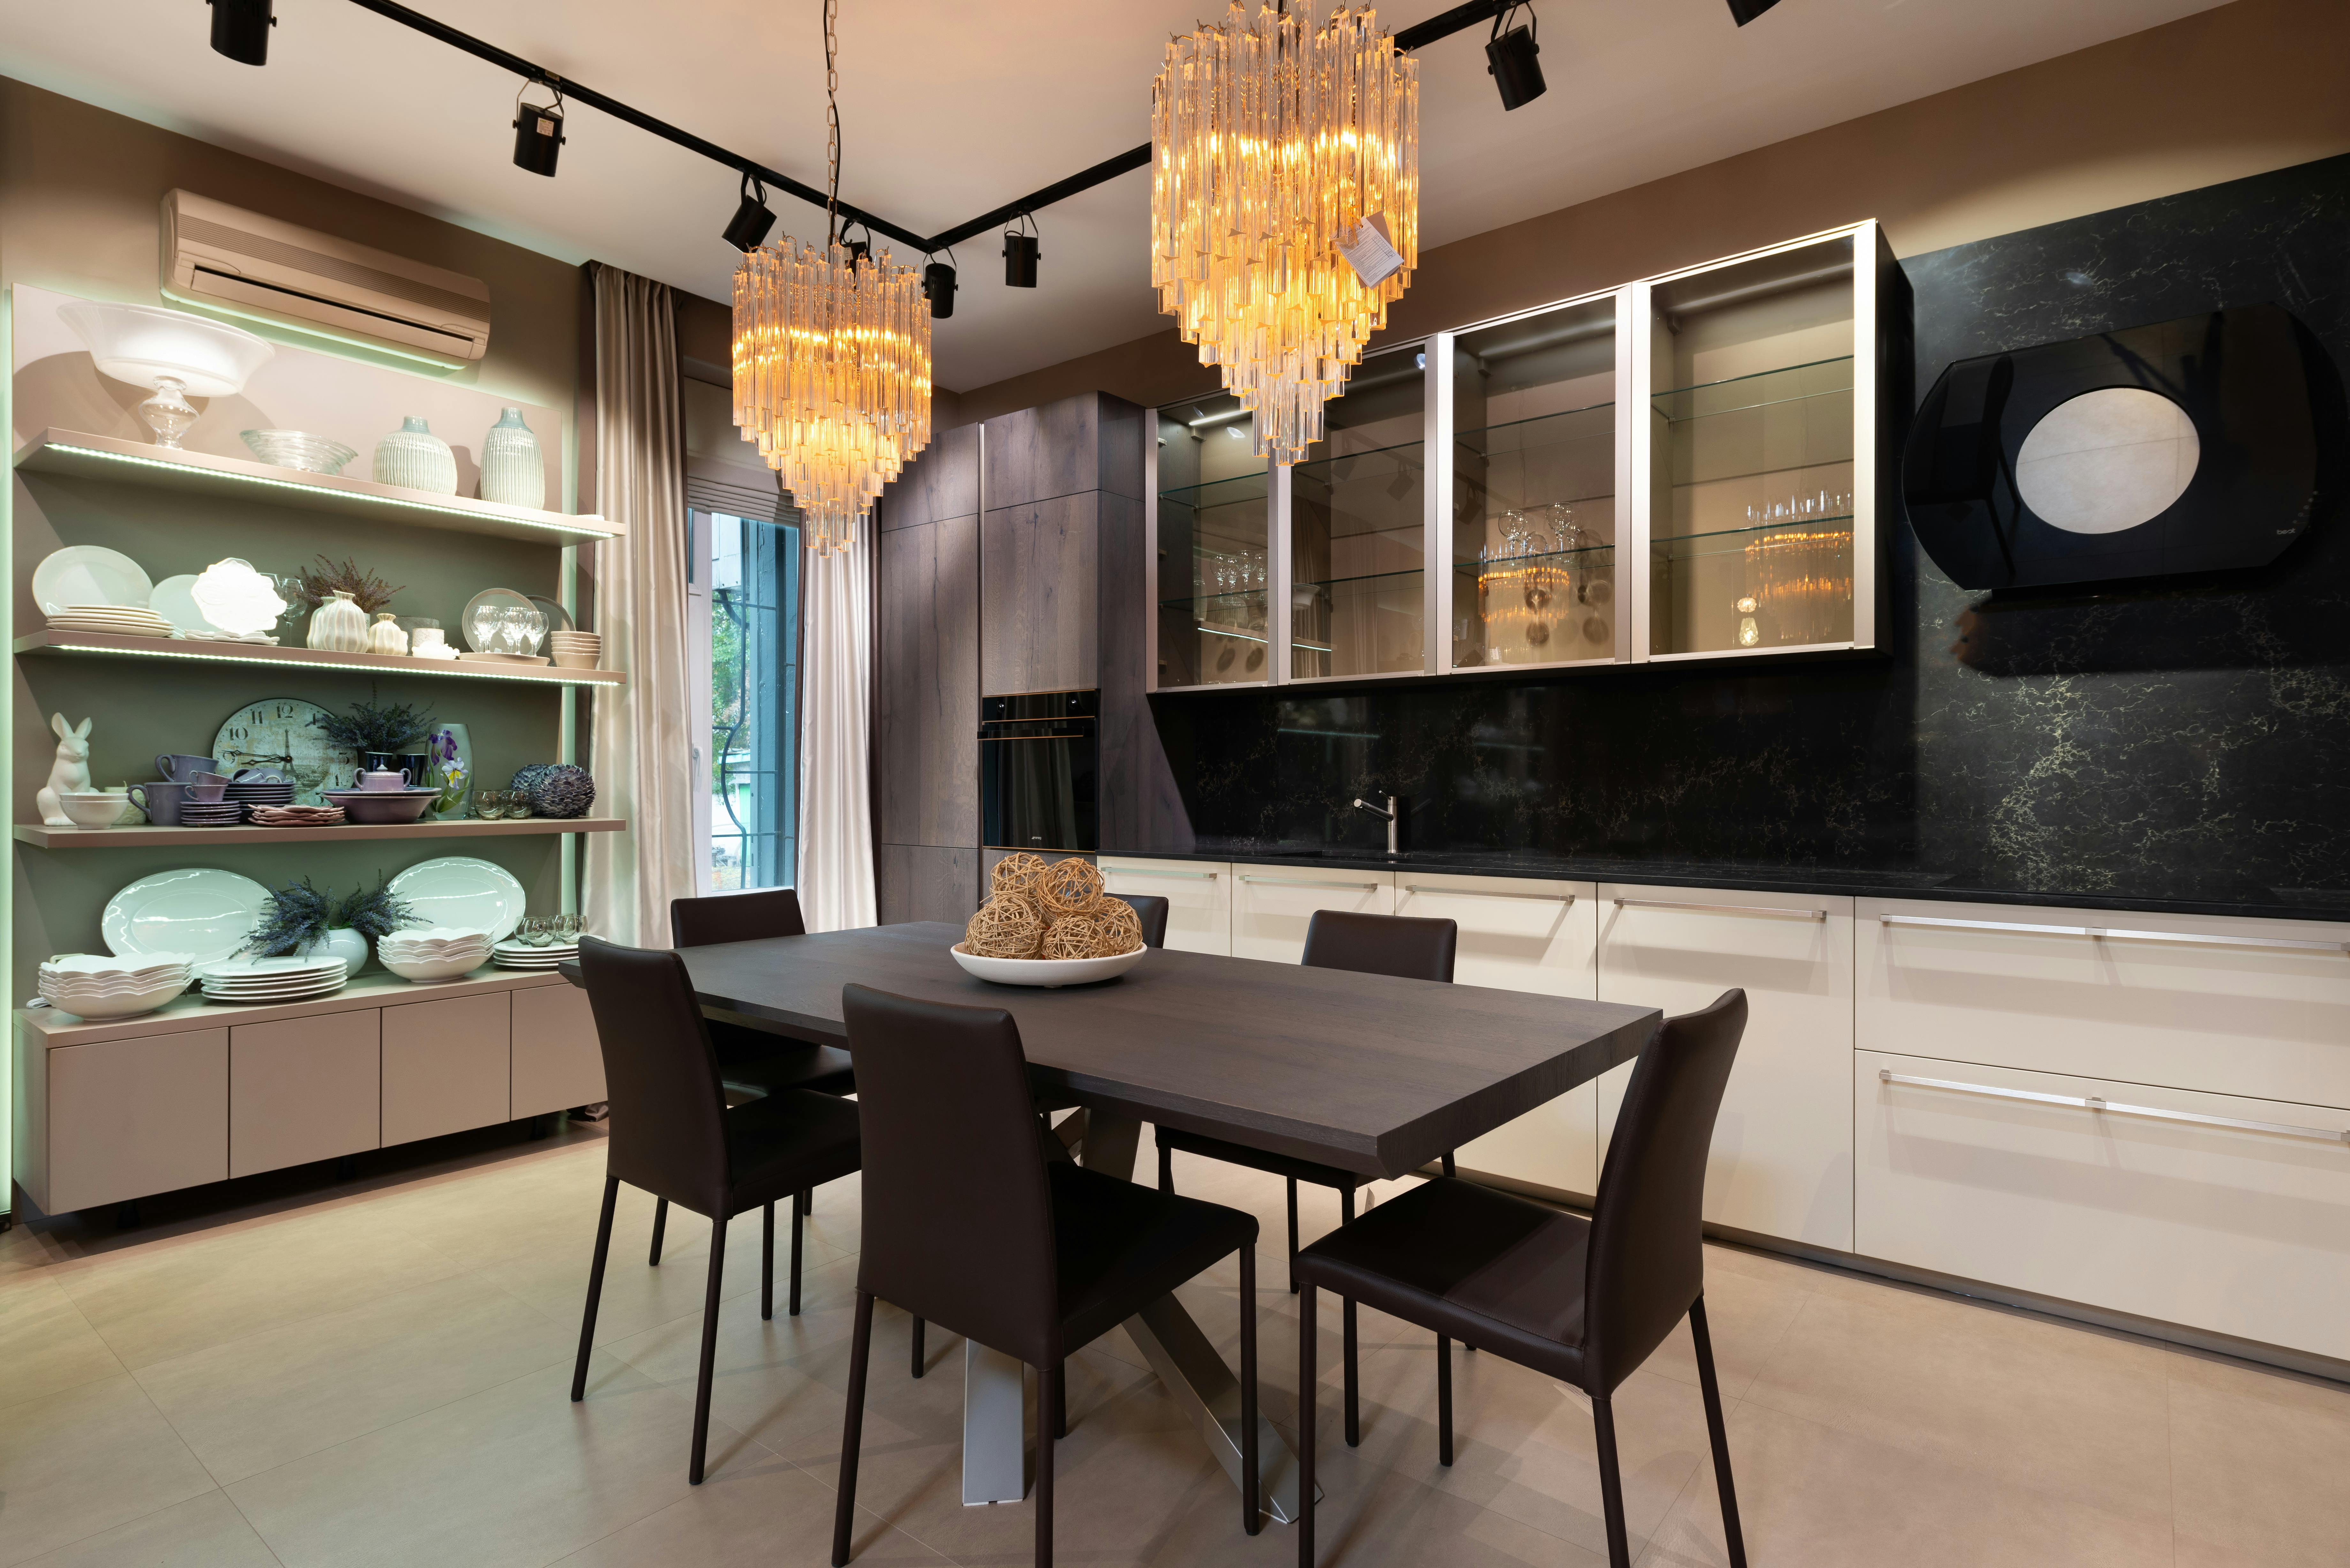 Contemporary kitchen design with built in appliances · Free Stock ...